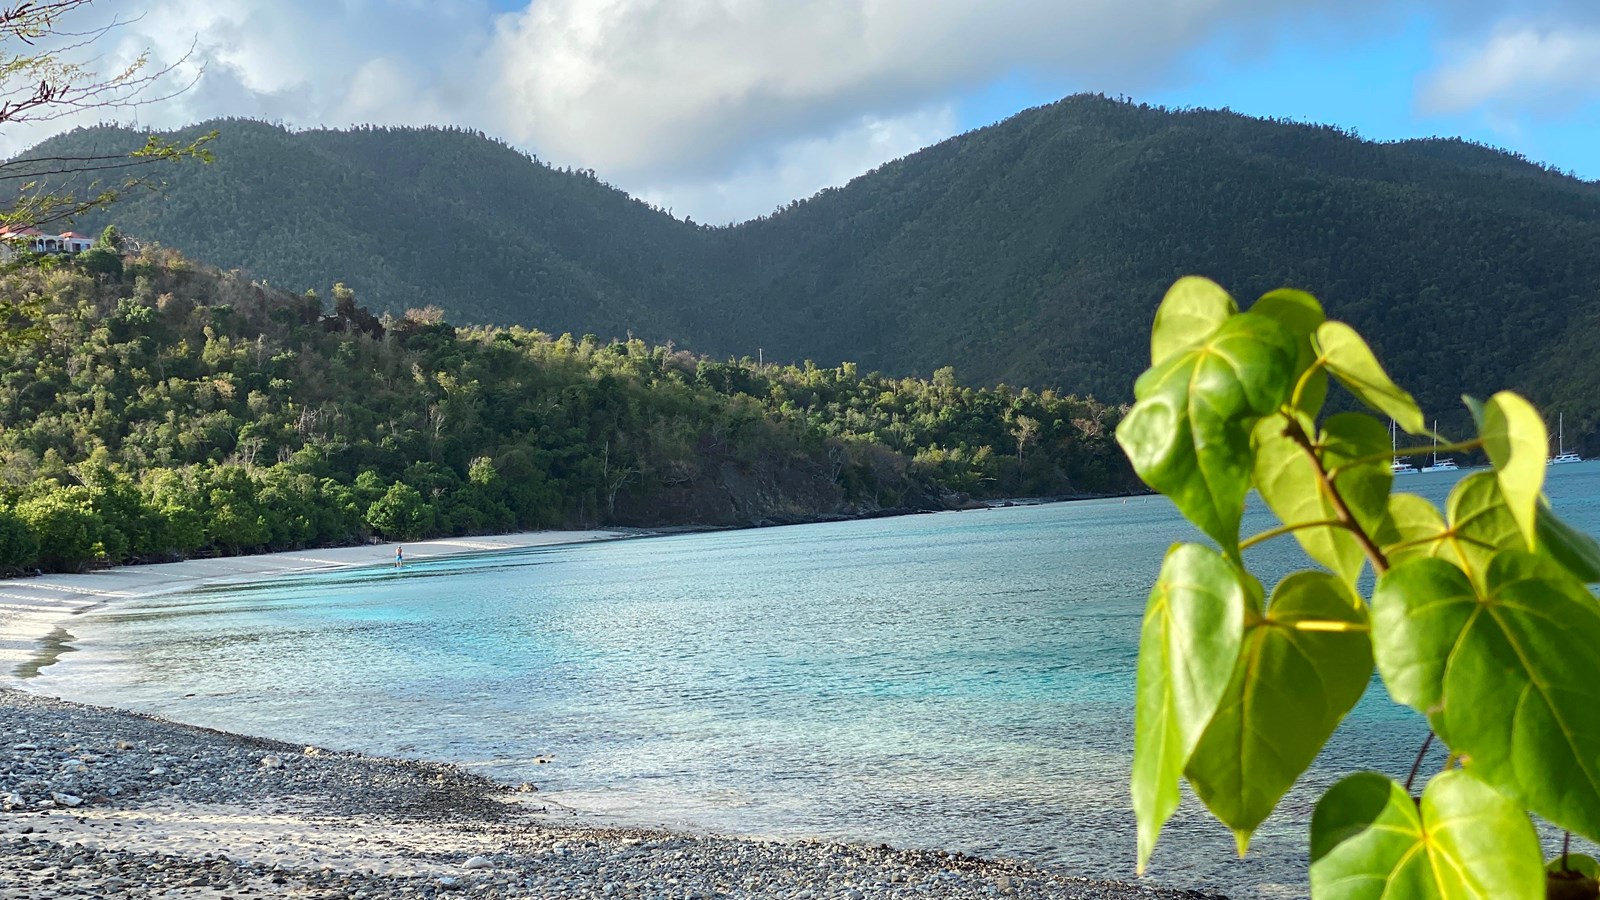 Bright green leaves of the Maho tree provide color along a narrow beach in a calm bay.